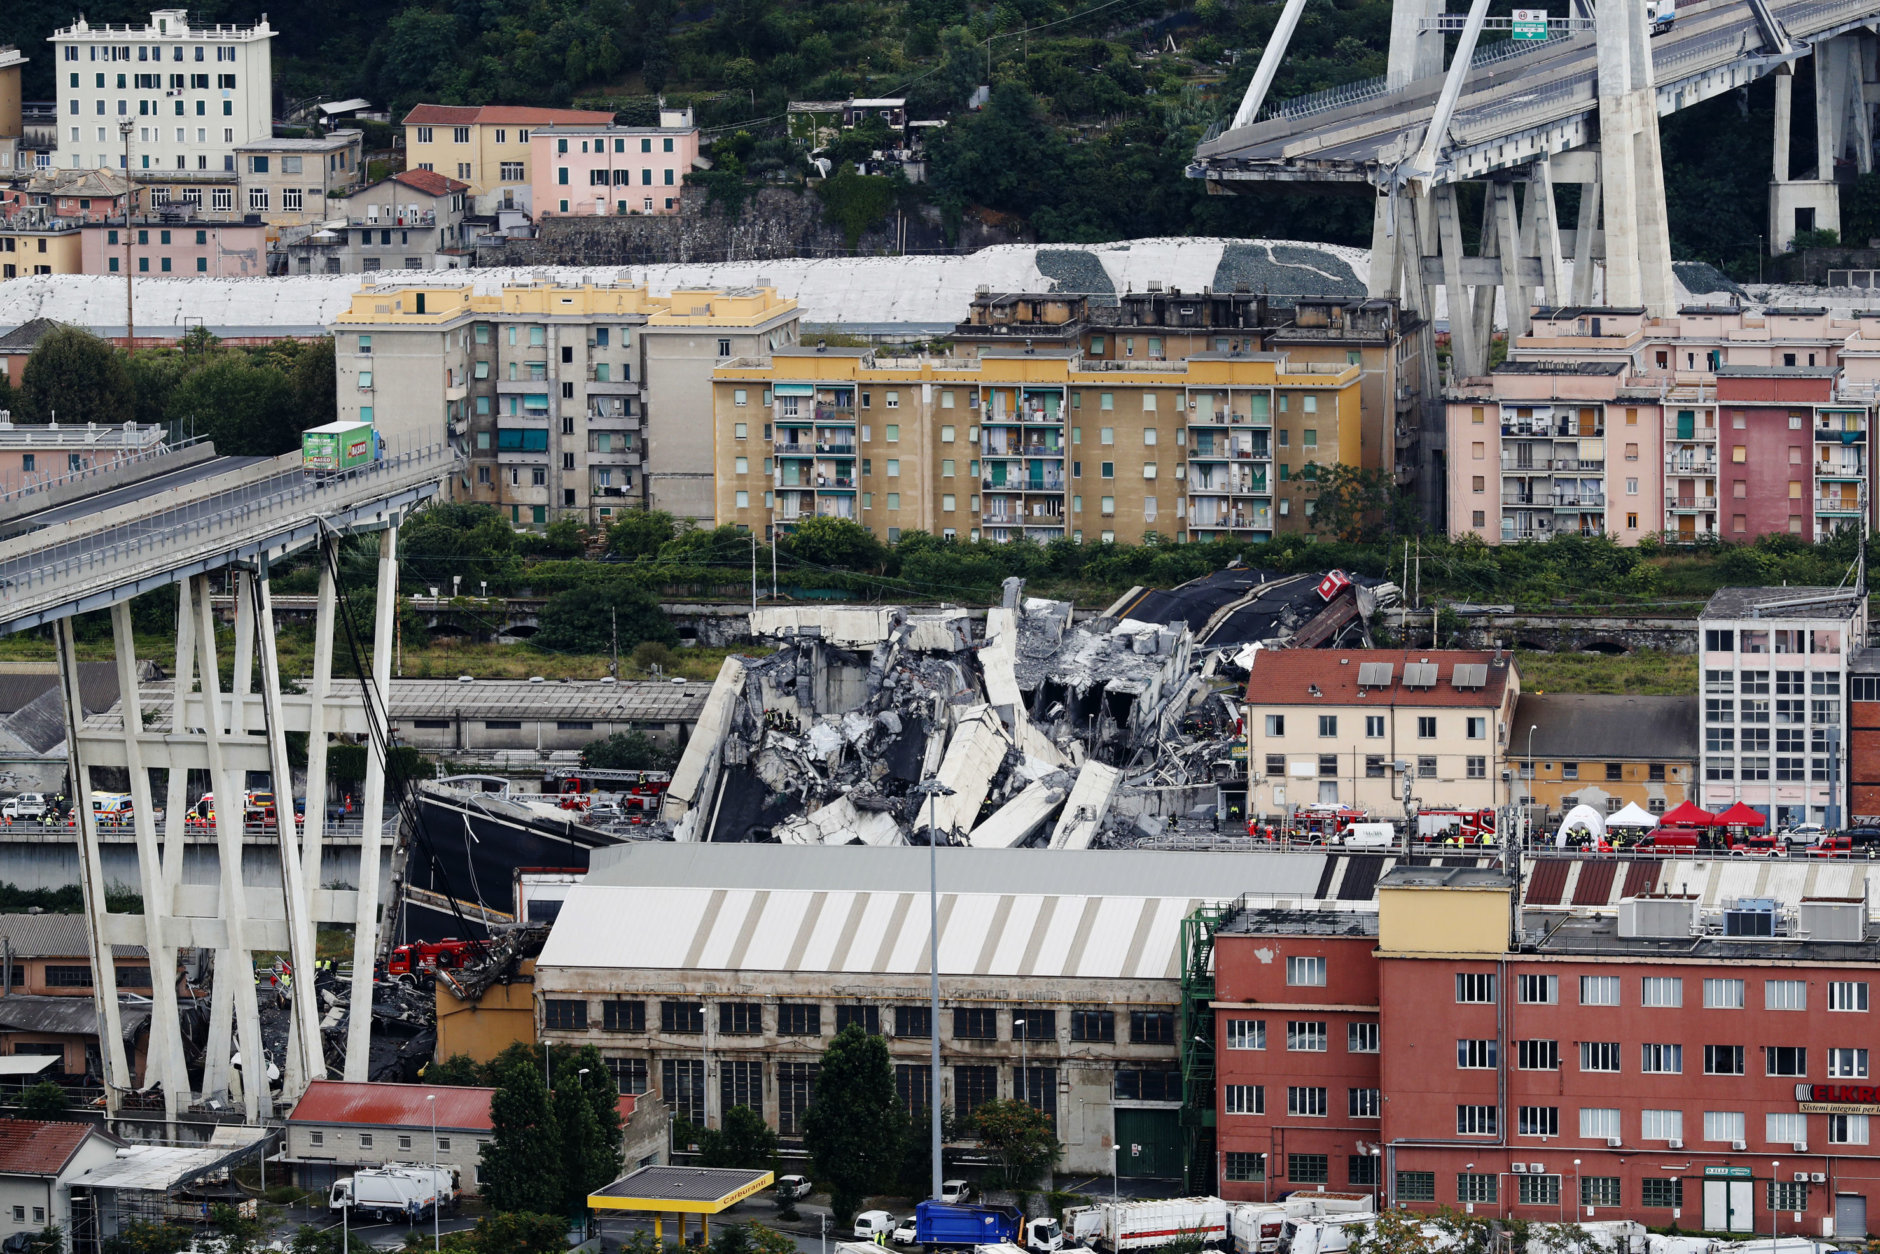 Cars are blocked on the Morandi highway bridge after a large section of it collapsed in Genoa, Italy, on Aug. 14, 2018, during a sudden and violent storm. (AP Photo/Antonio Calanni)